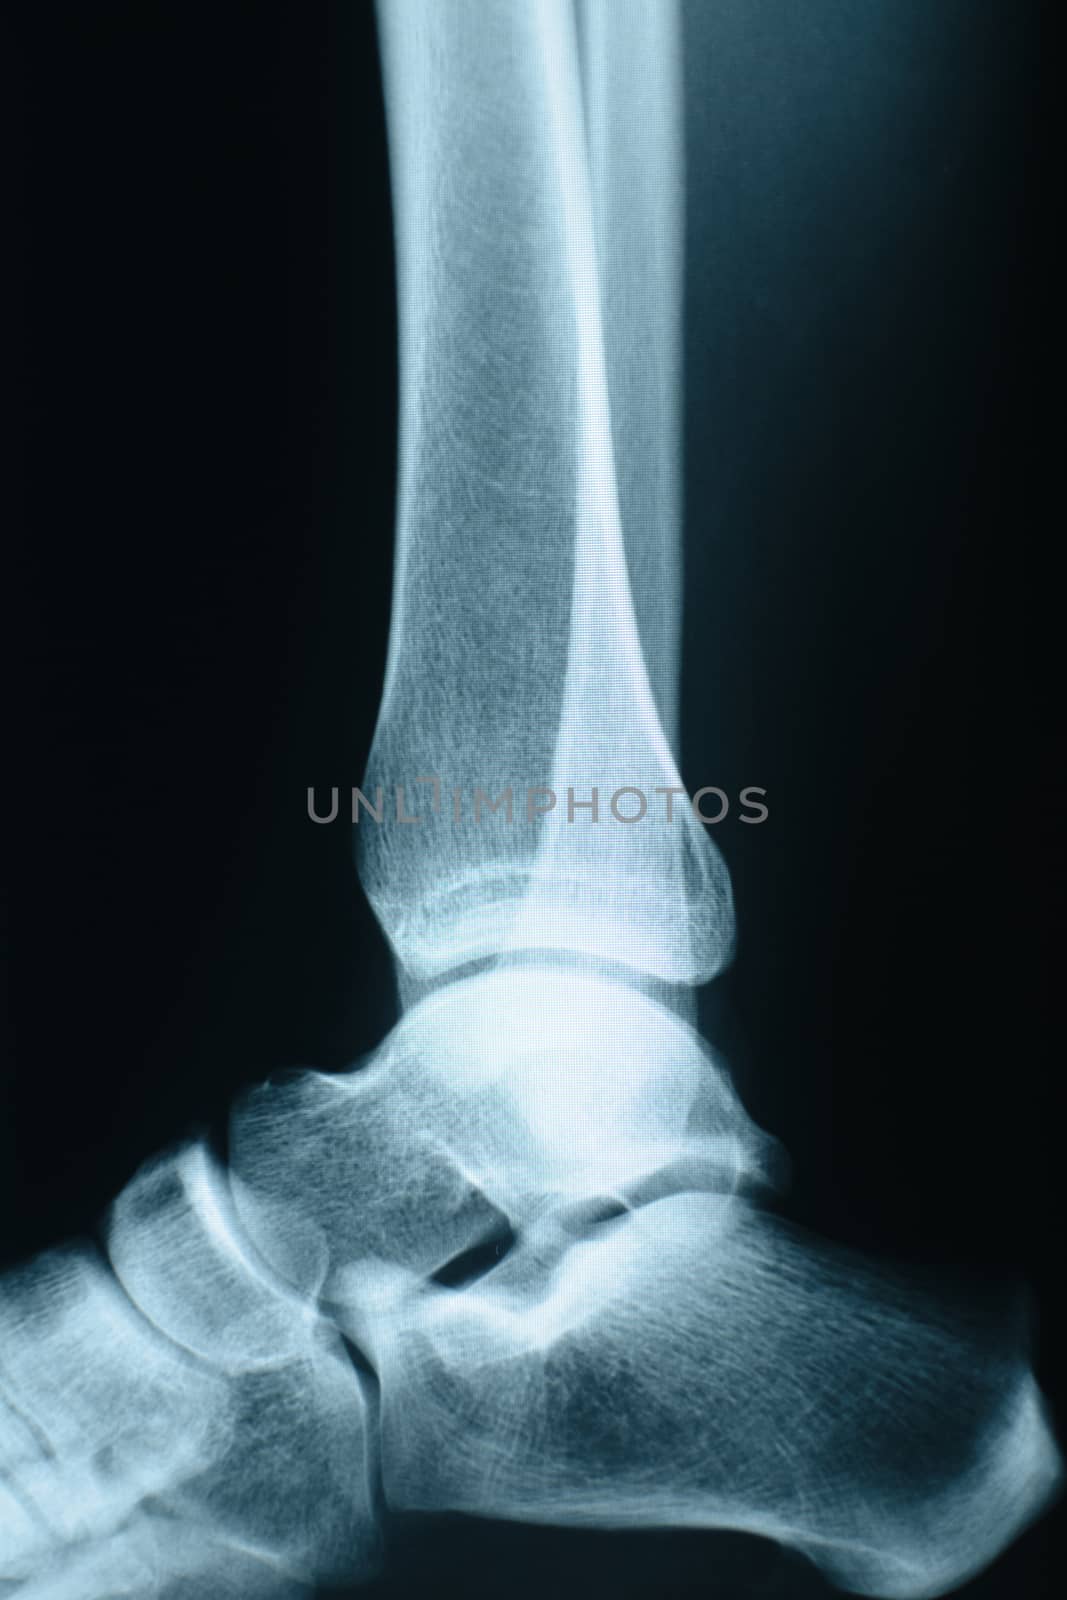 Ankle xray by photosampler